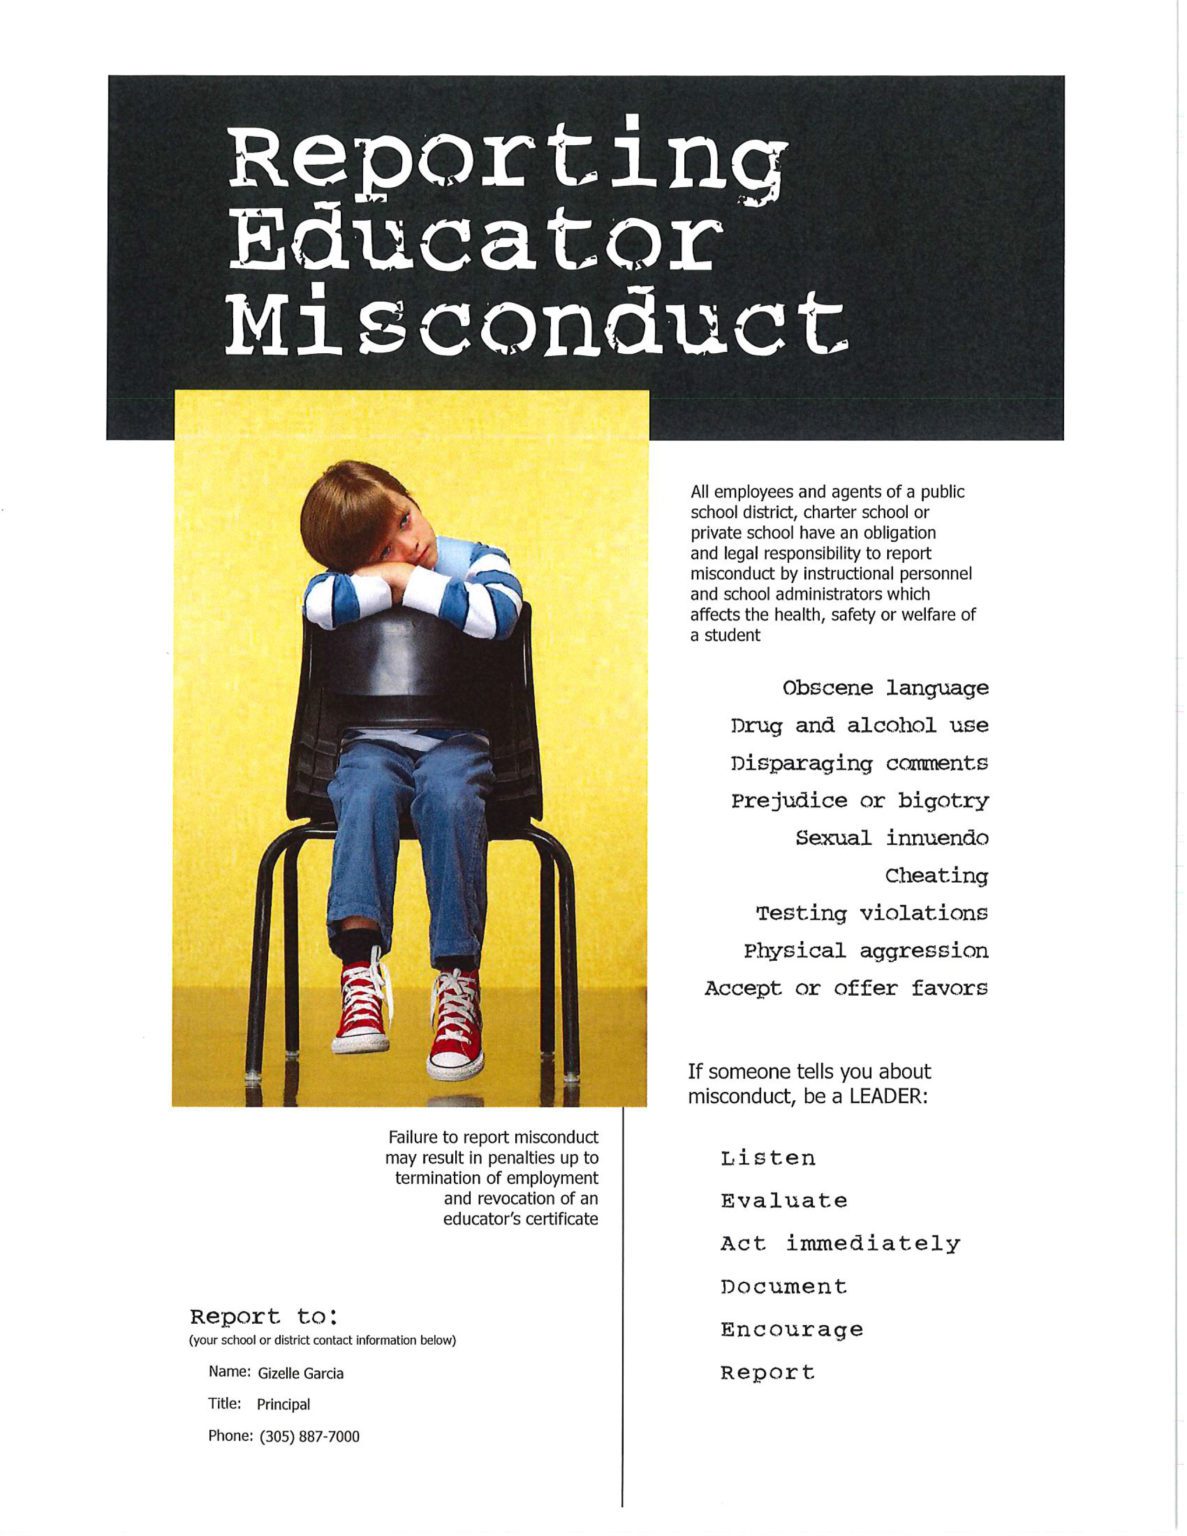 Standards of Ethical Conduct - Reporting Educactors Misconduct